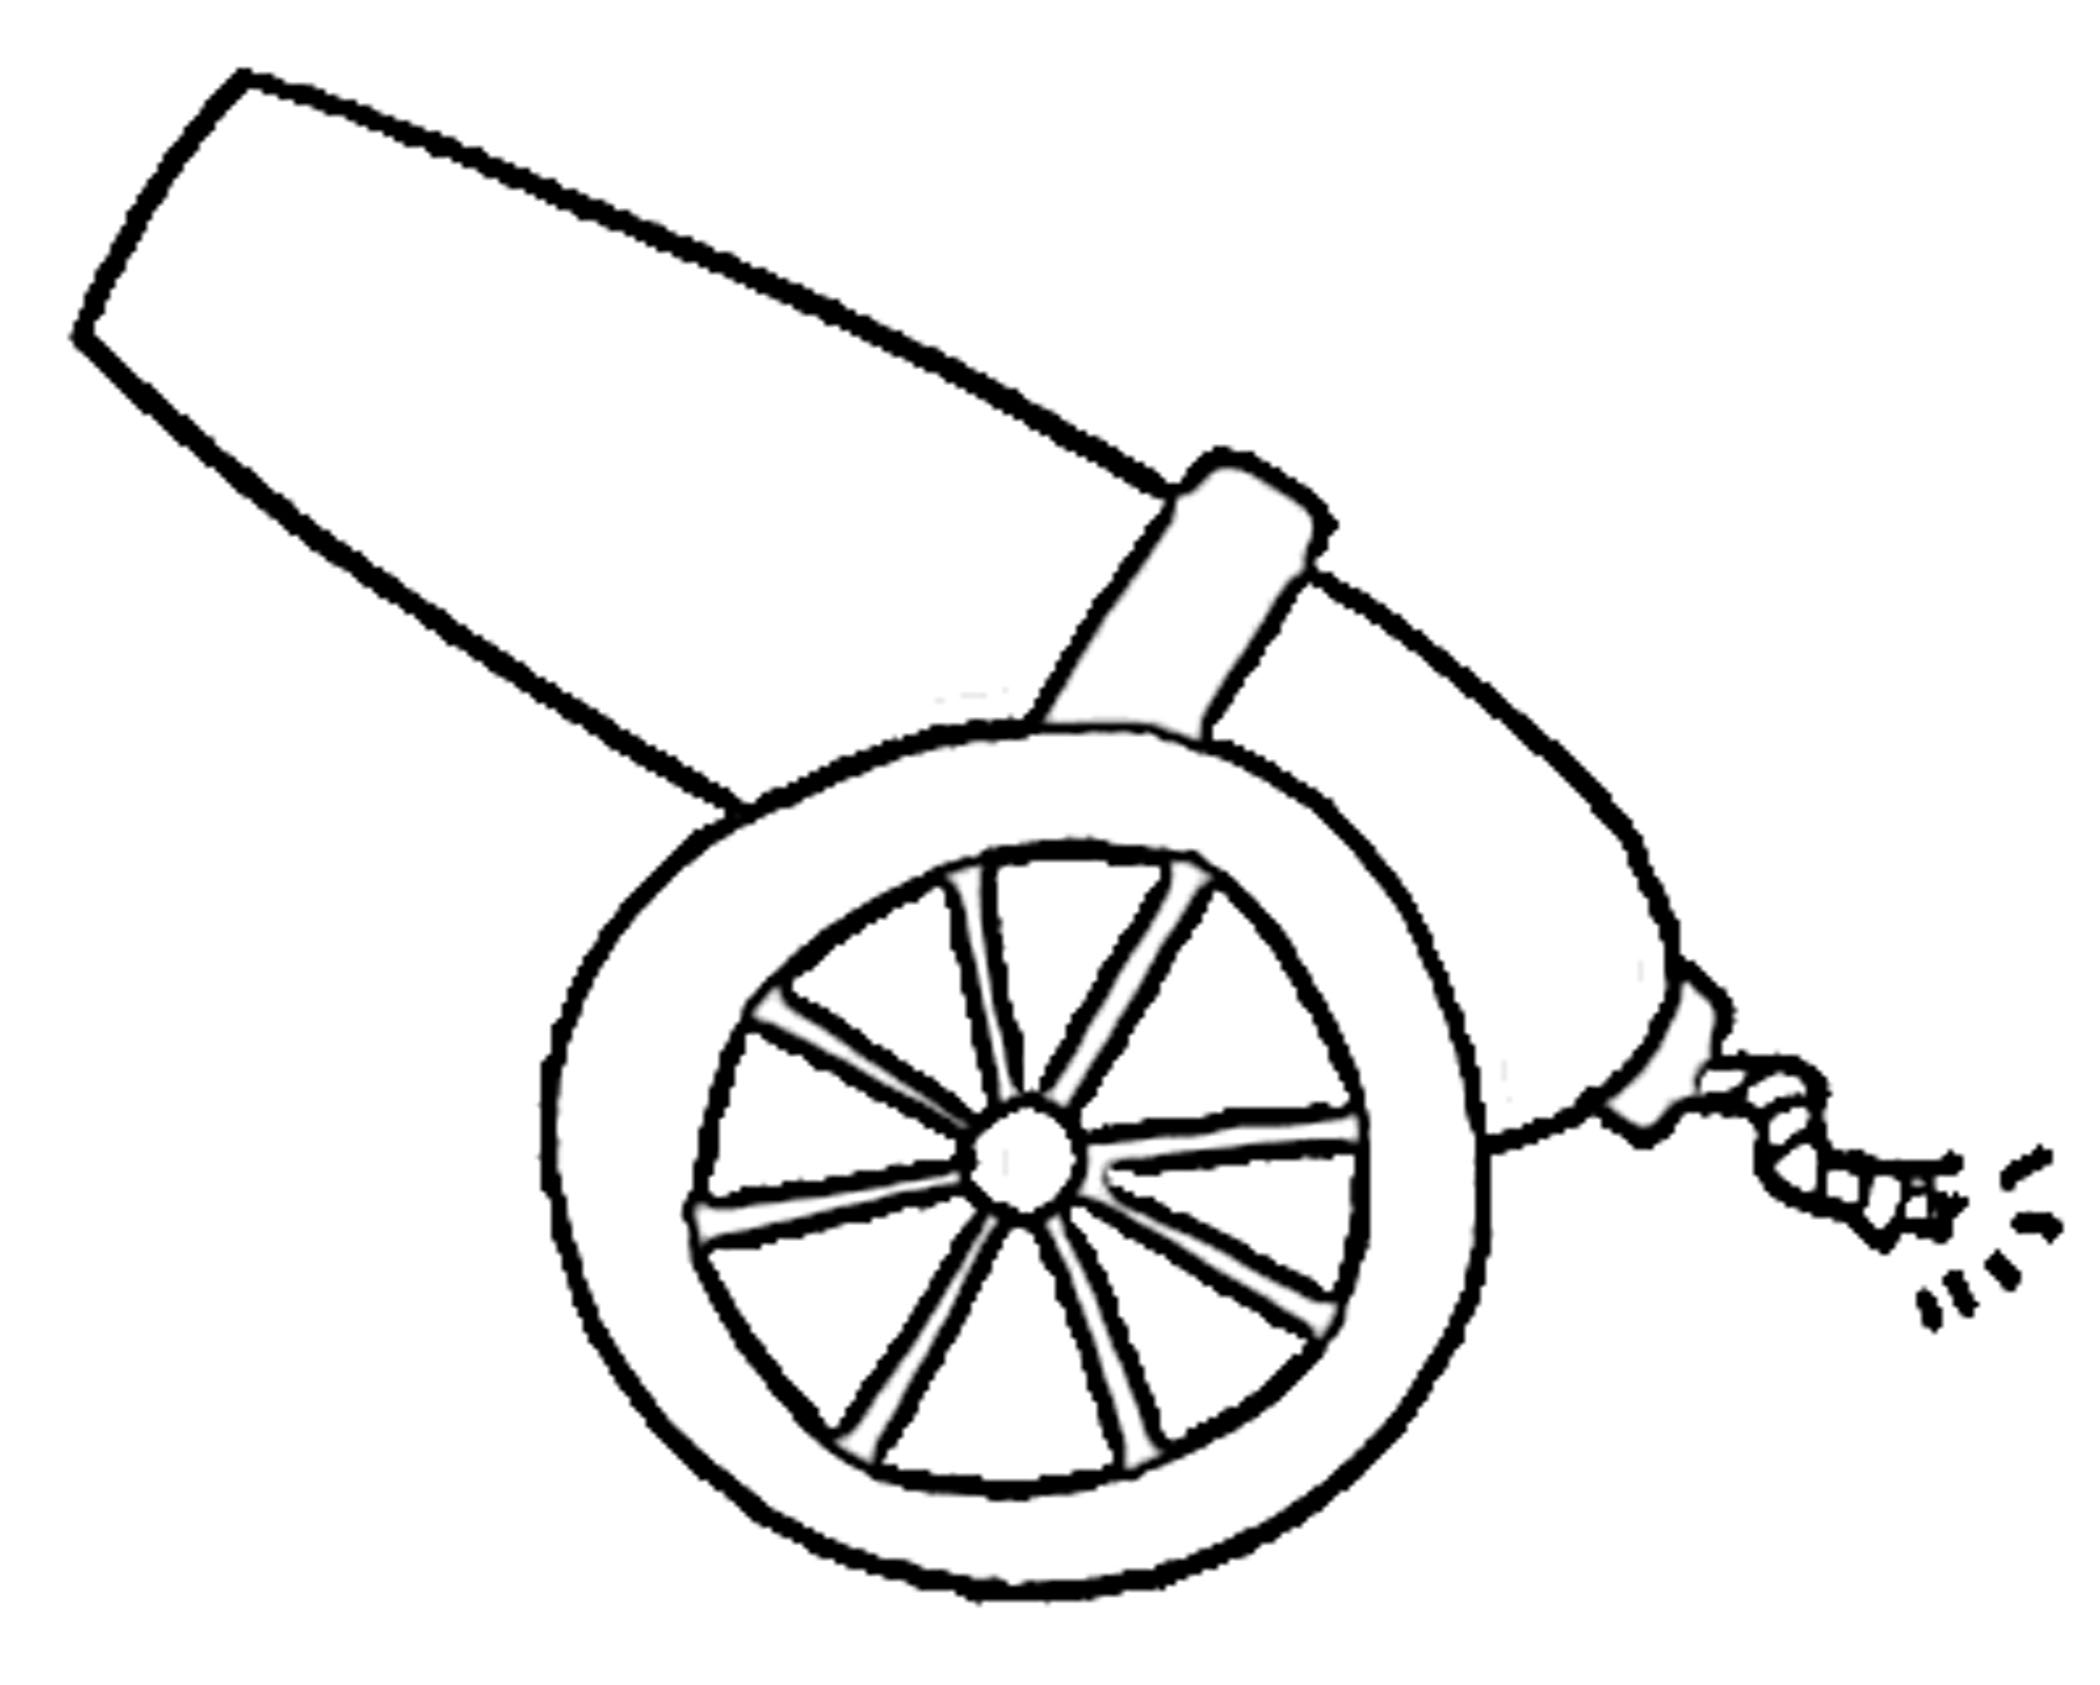 Picture Of Cannon   Clipart Best